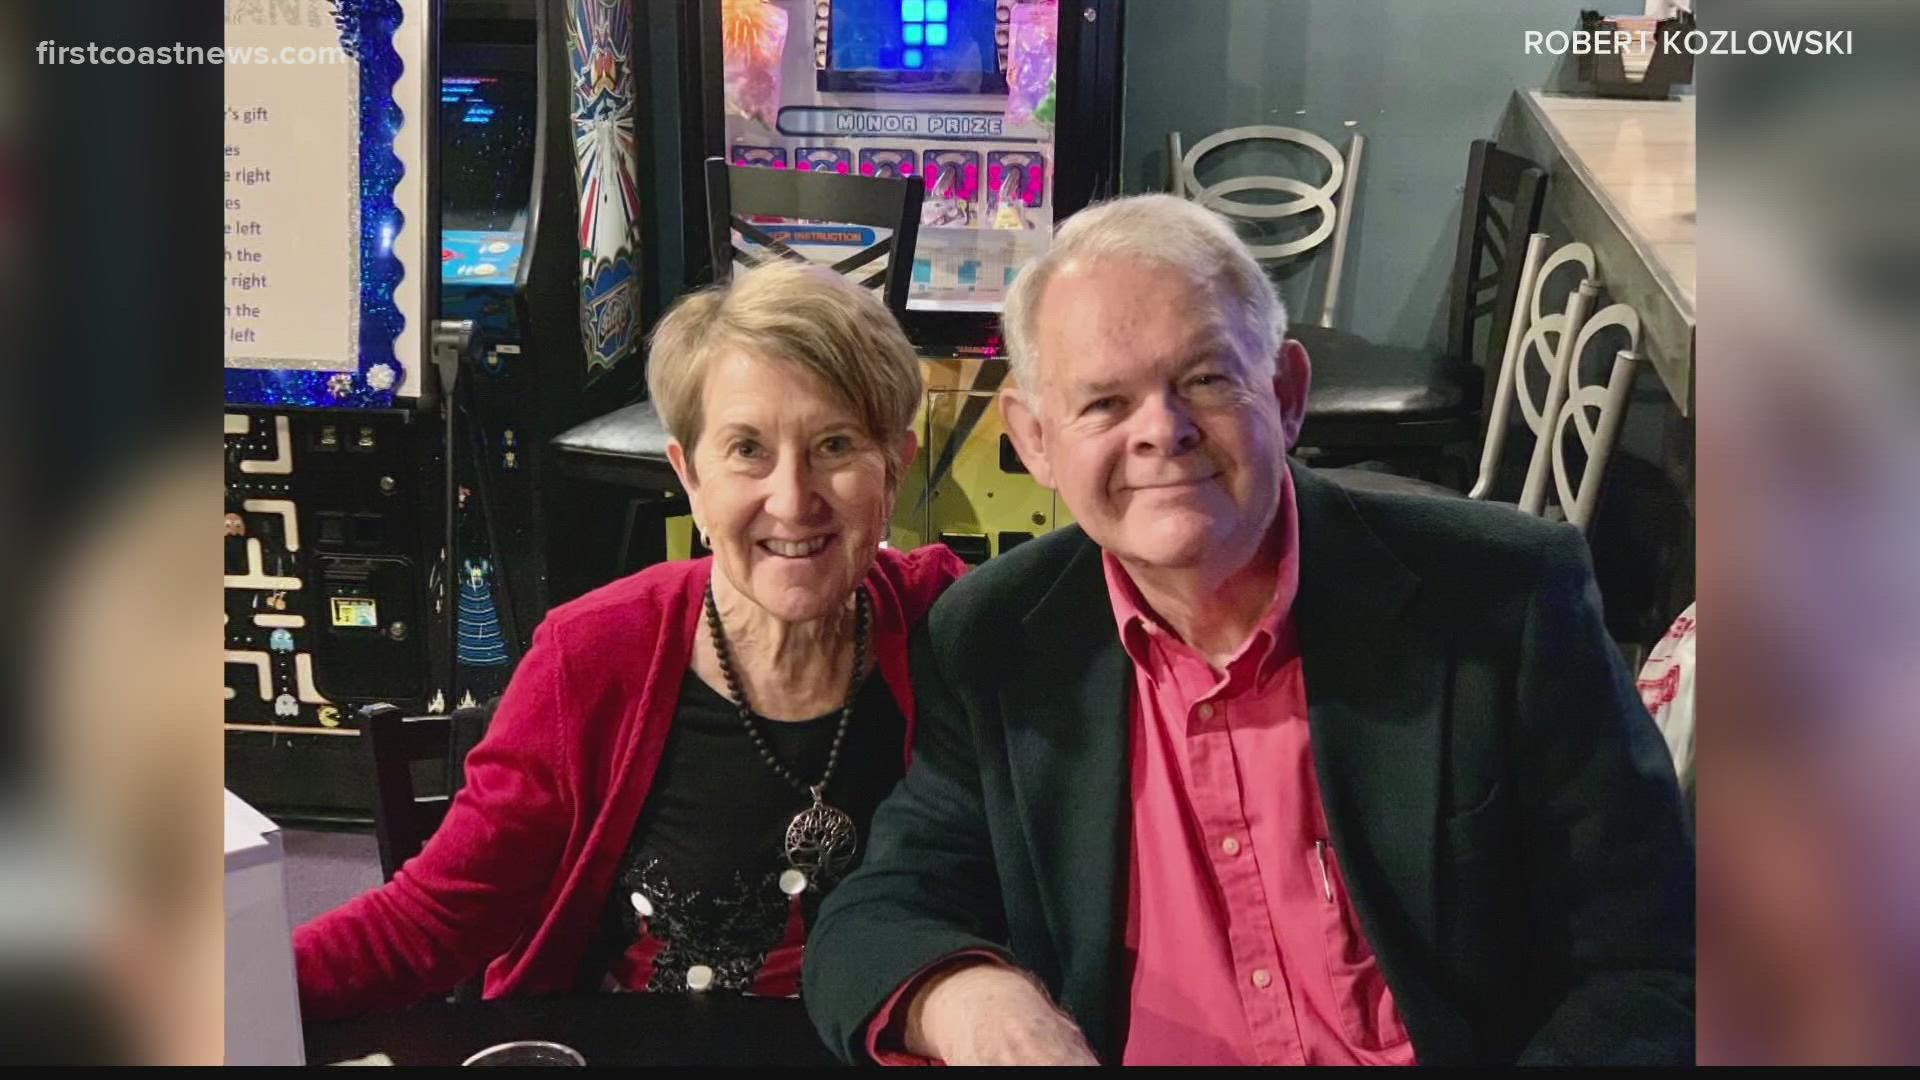 The couple was celebrating their 50th anniversary together with the 'trip of a lifetime.'